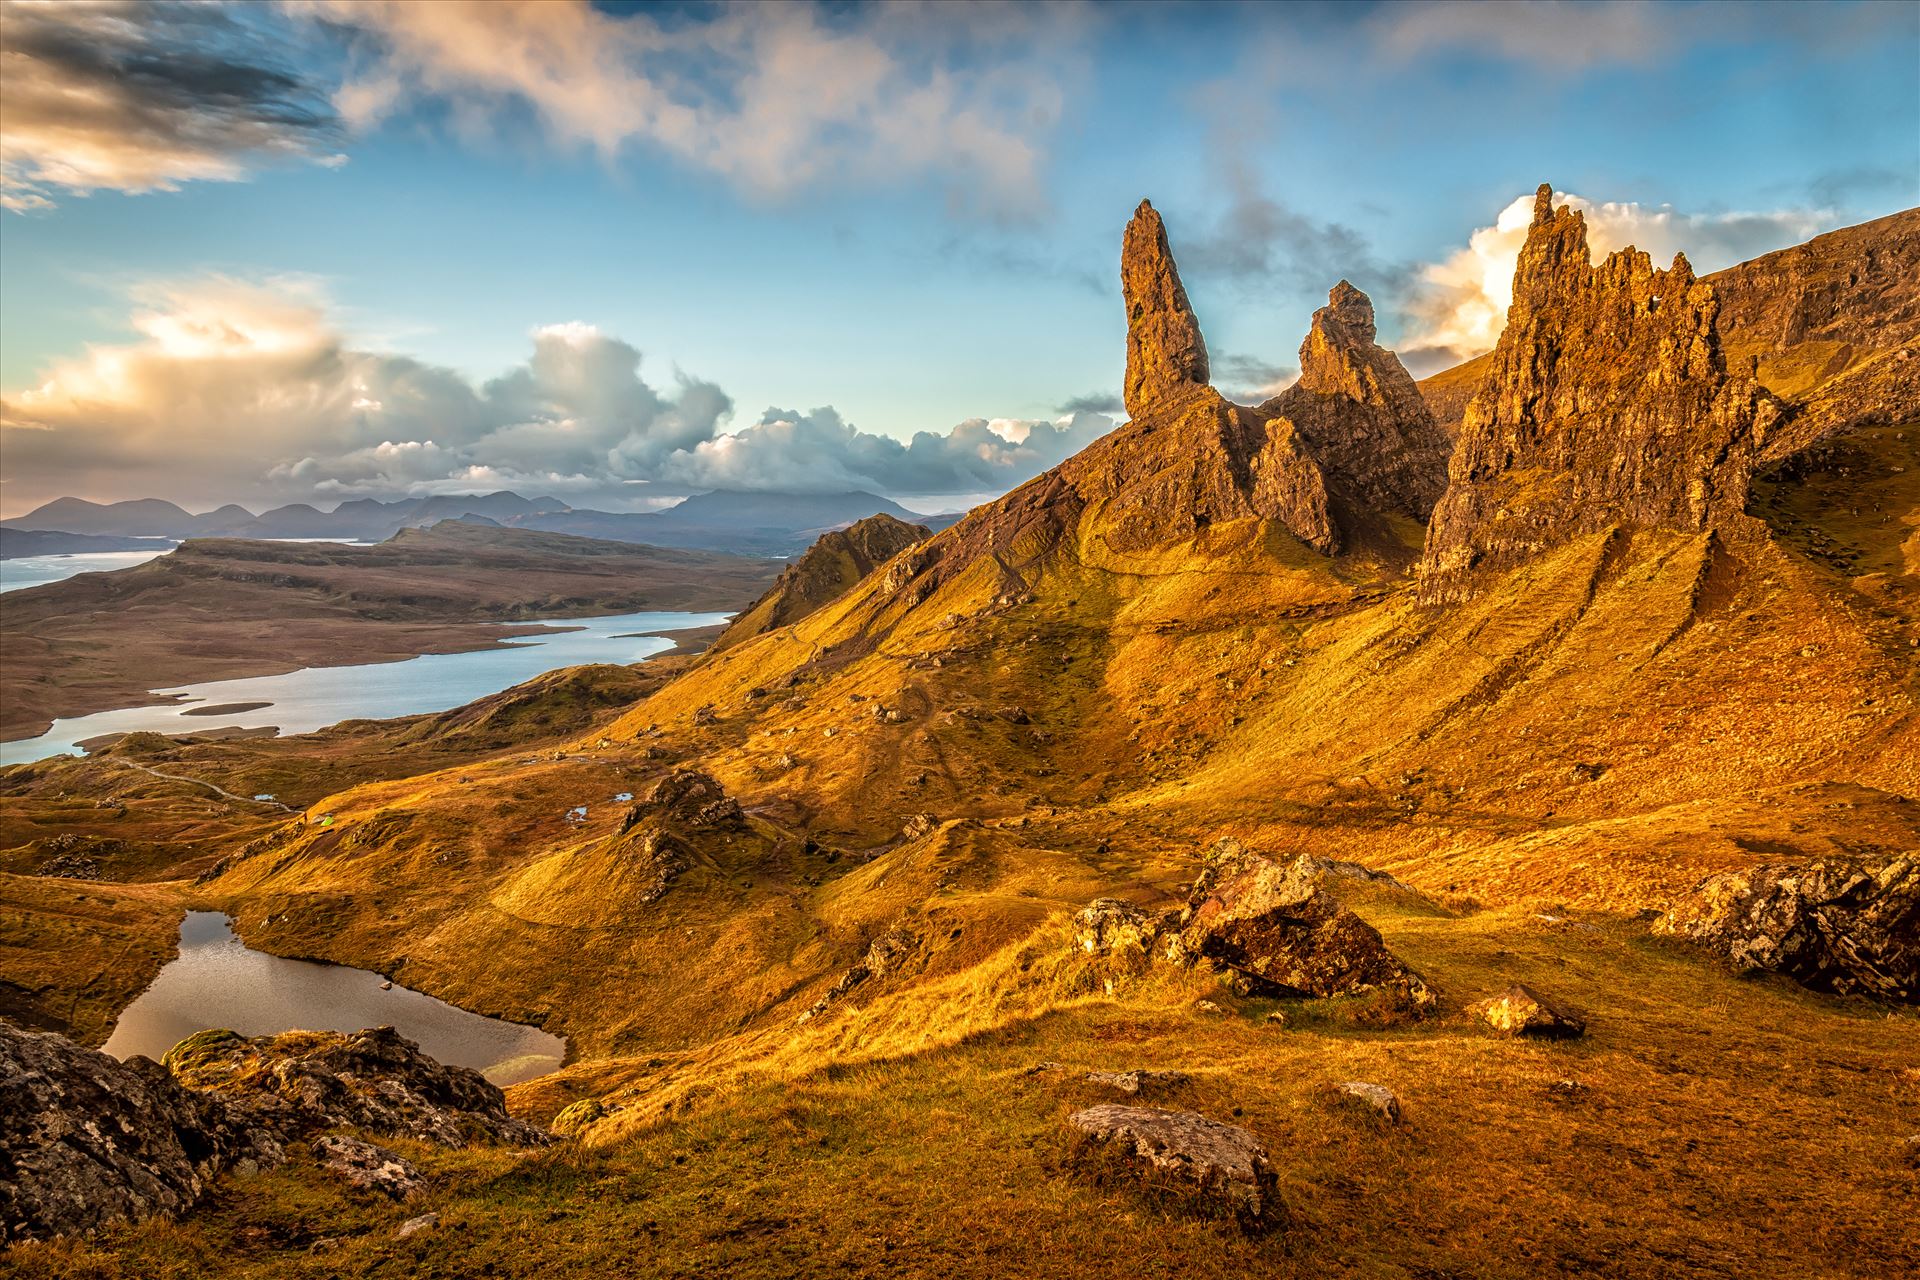 The Old Man of Storr The Storr is a rocky hill on the Trotternish peninsula of the Isle of Skye in Scotland. The hill presents a steep rocky eastern face overlooking the Sound of Raasay, contrasting with gentler grassy slopes to the west. by philreay